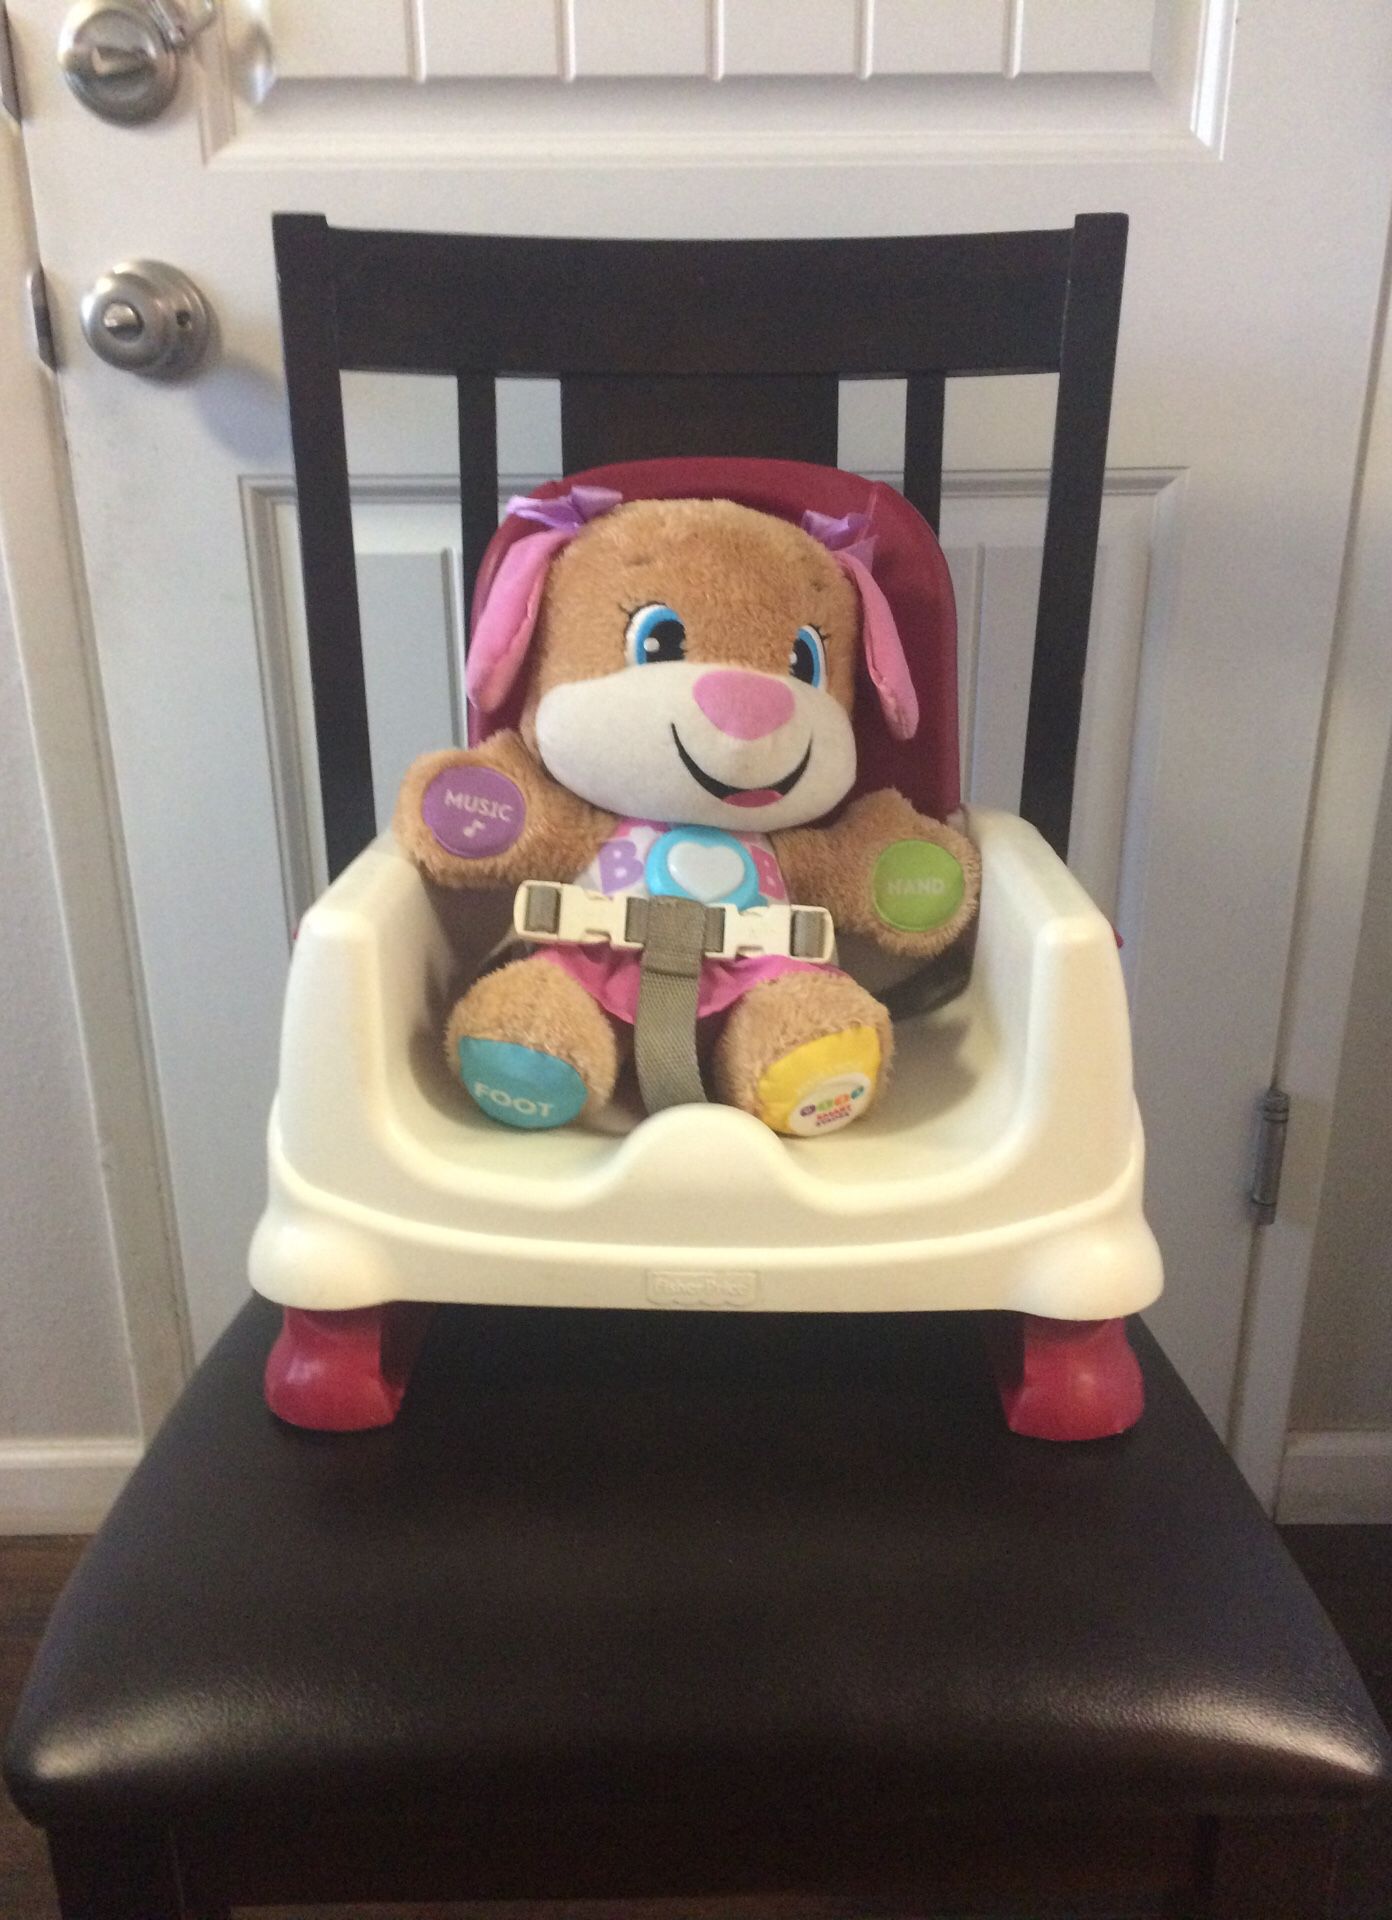 Booster seat for kids Fisher Price brand adjustable